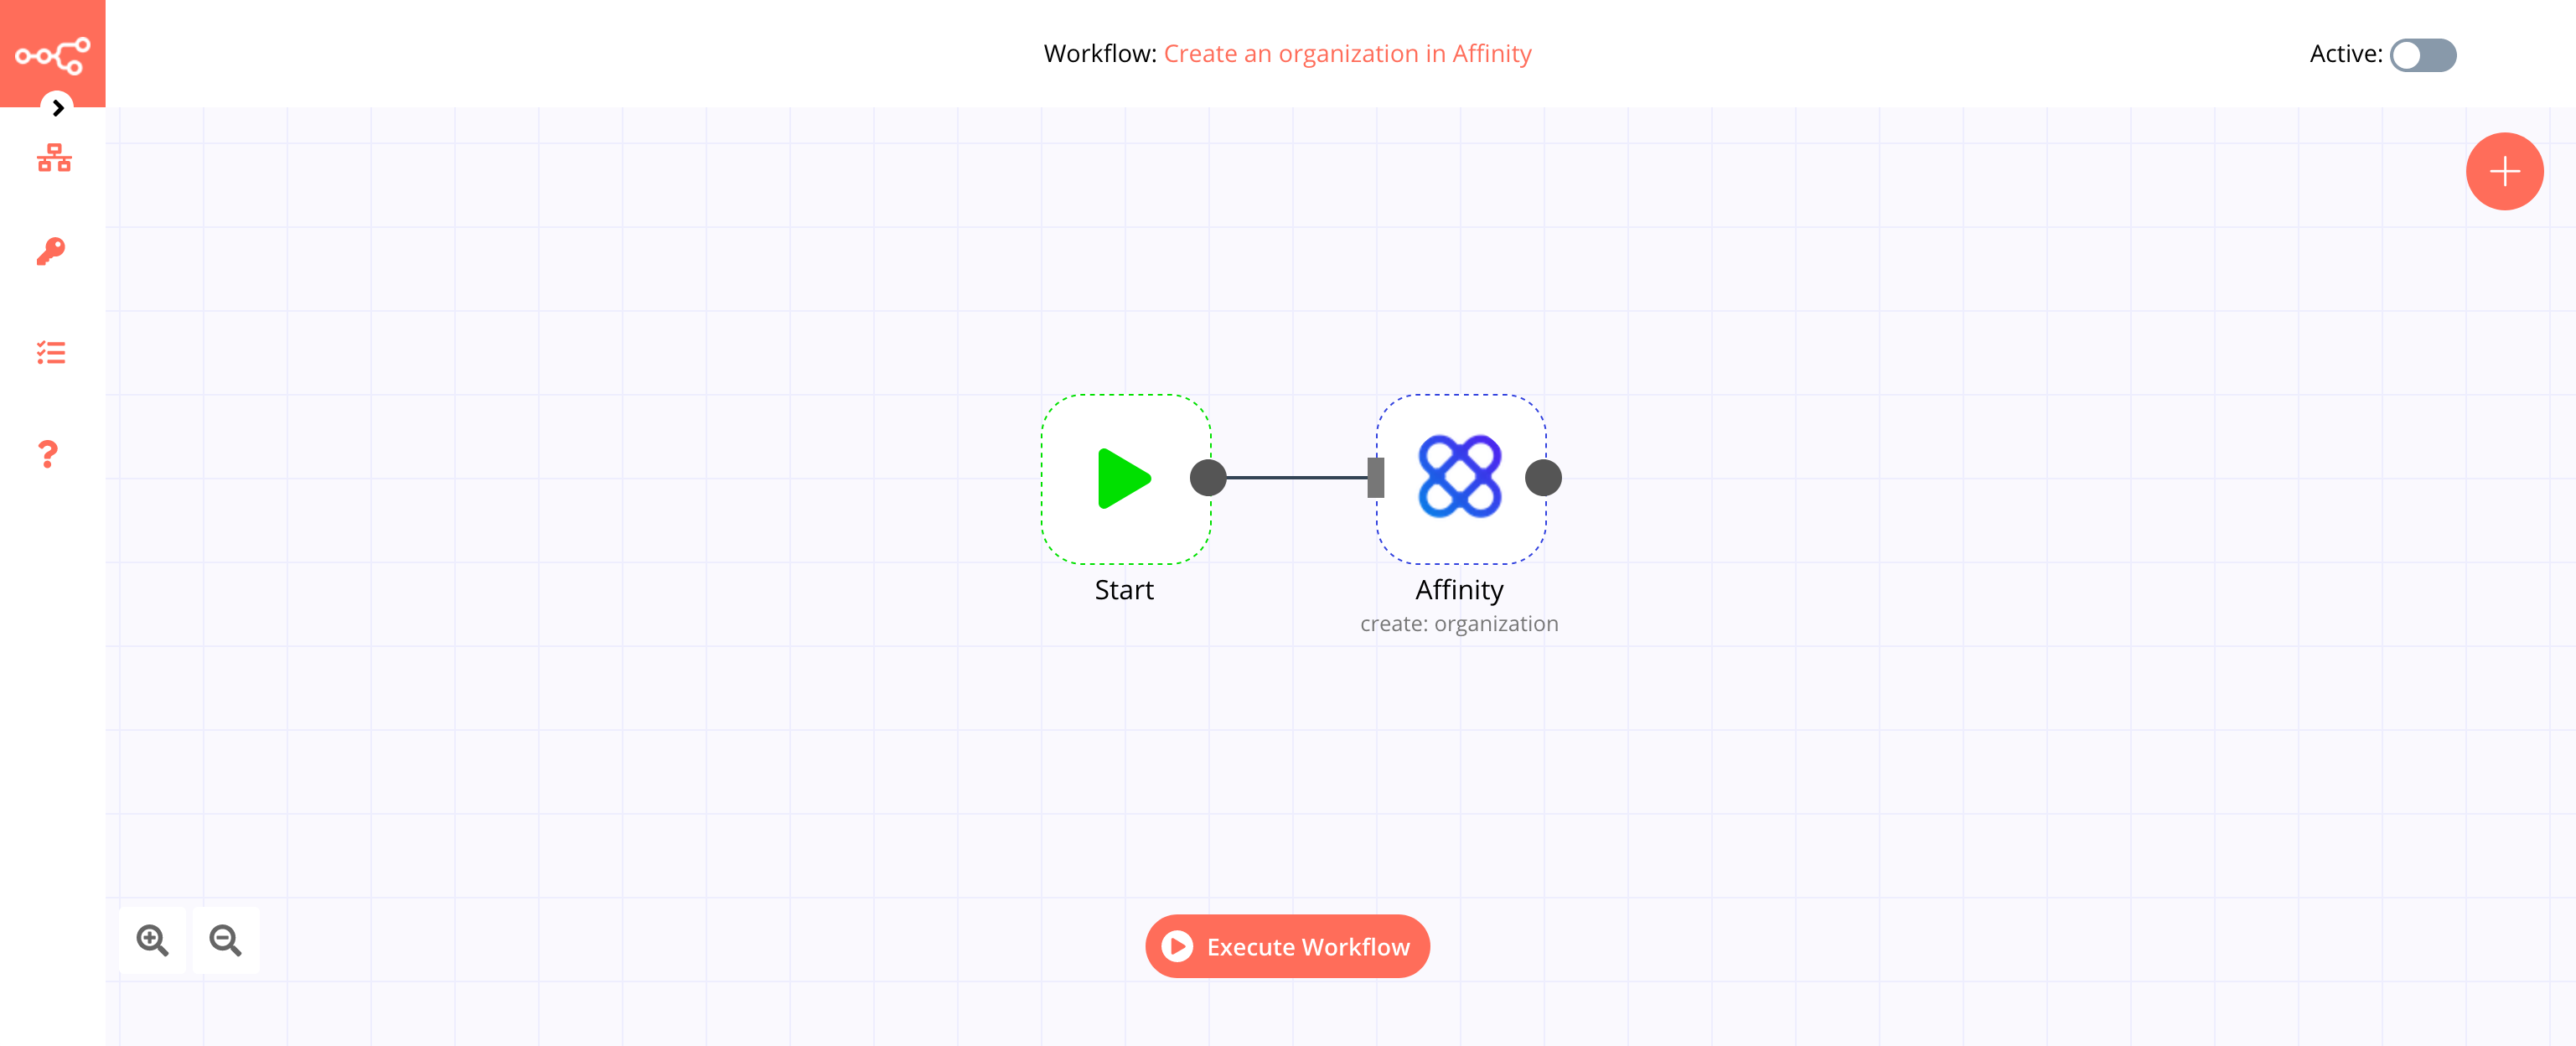 A workflow with the Affinity node